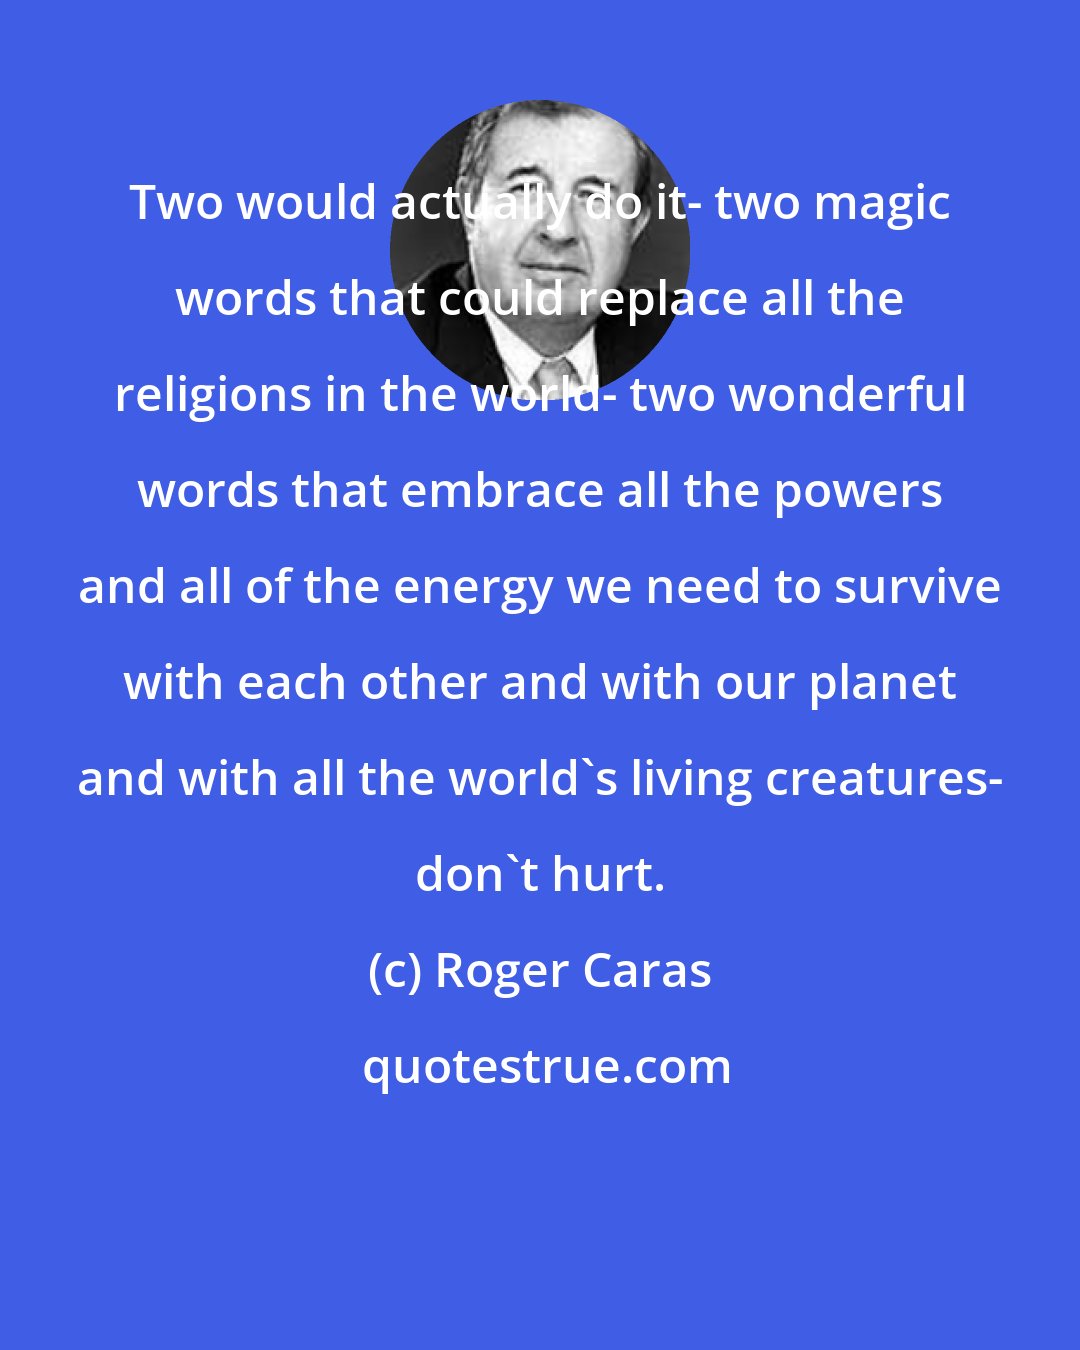 Roger Caras: Two would actually do it- two magic words that could replace all the religions in the world- two wonderful words that embrace all the powers and all of the energy we need to survive with each other and with our planet and with all the world's living creatures- don't hurt.